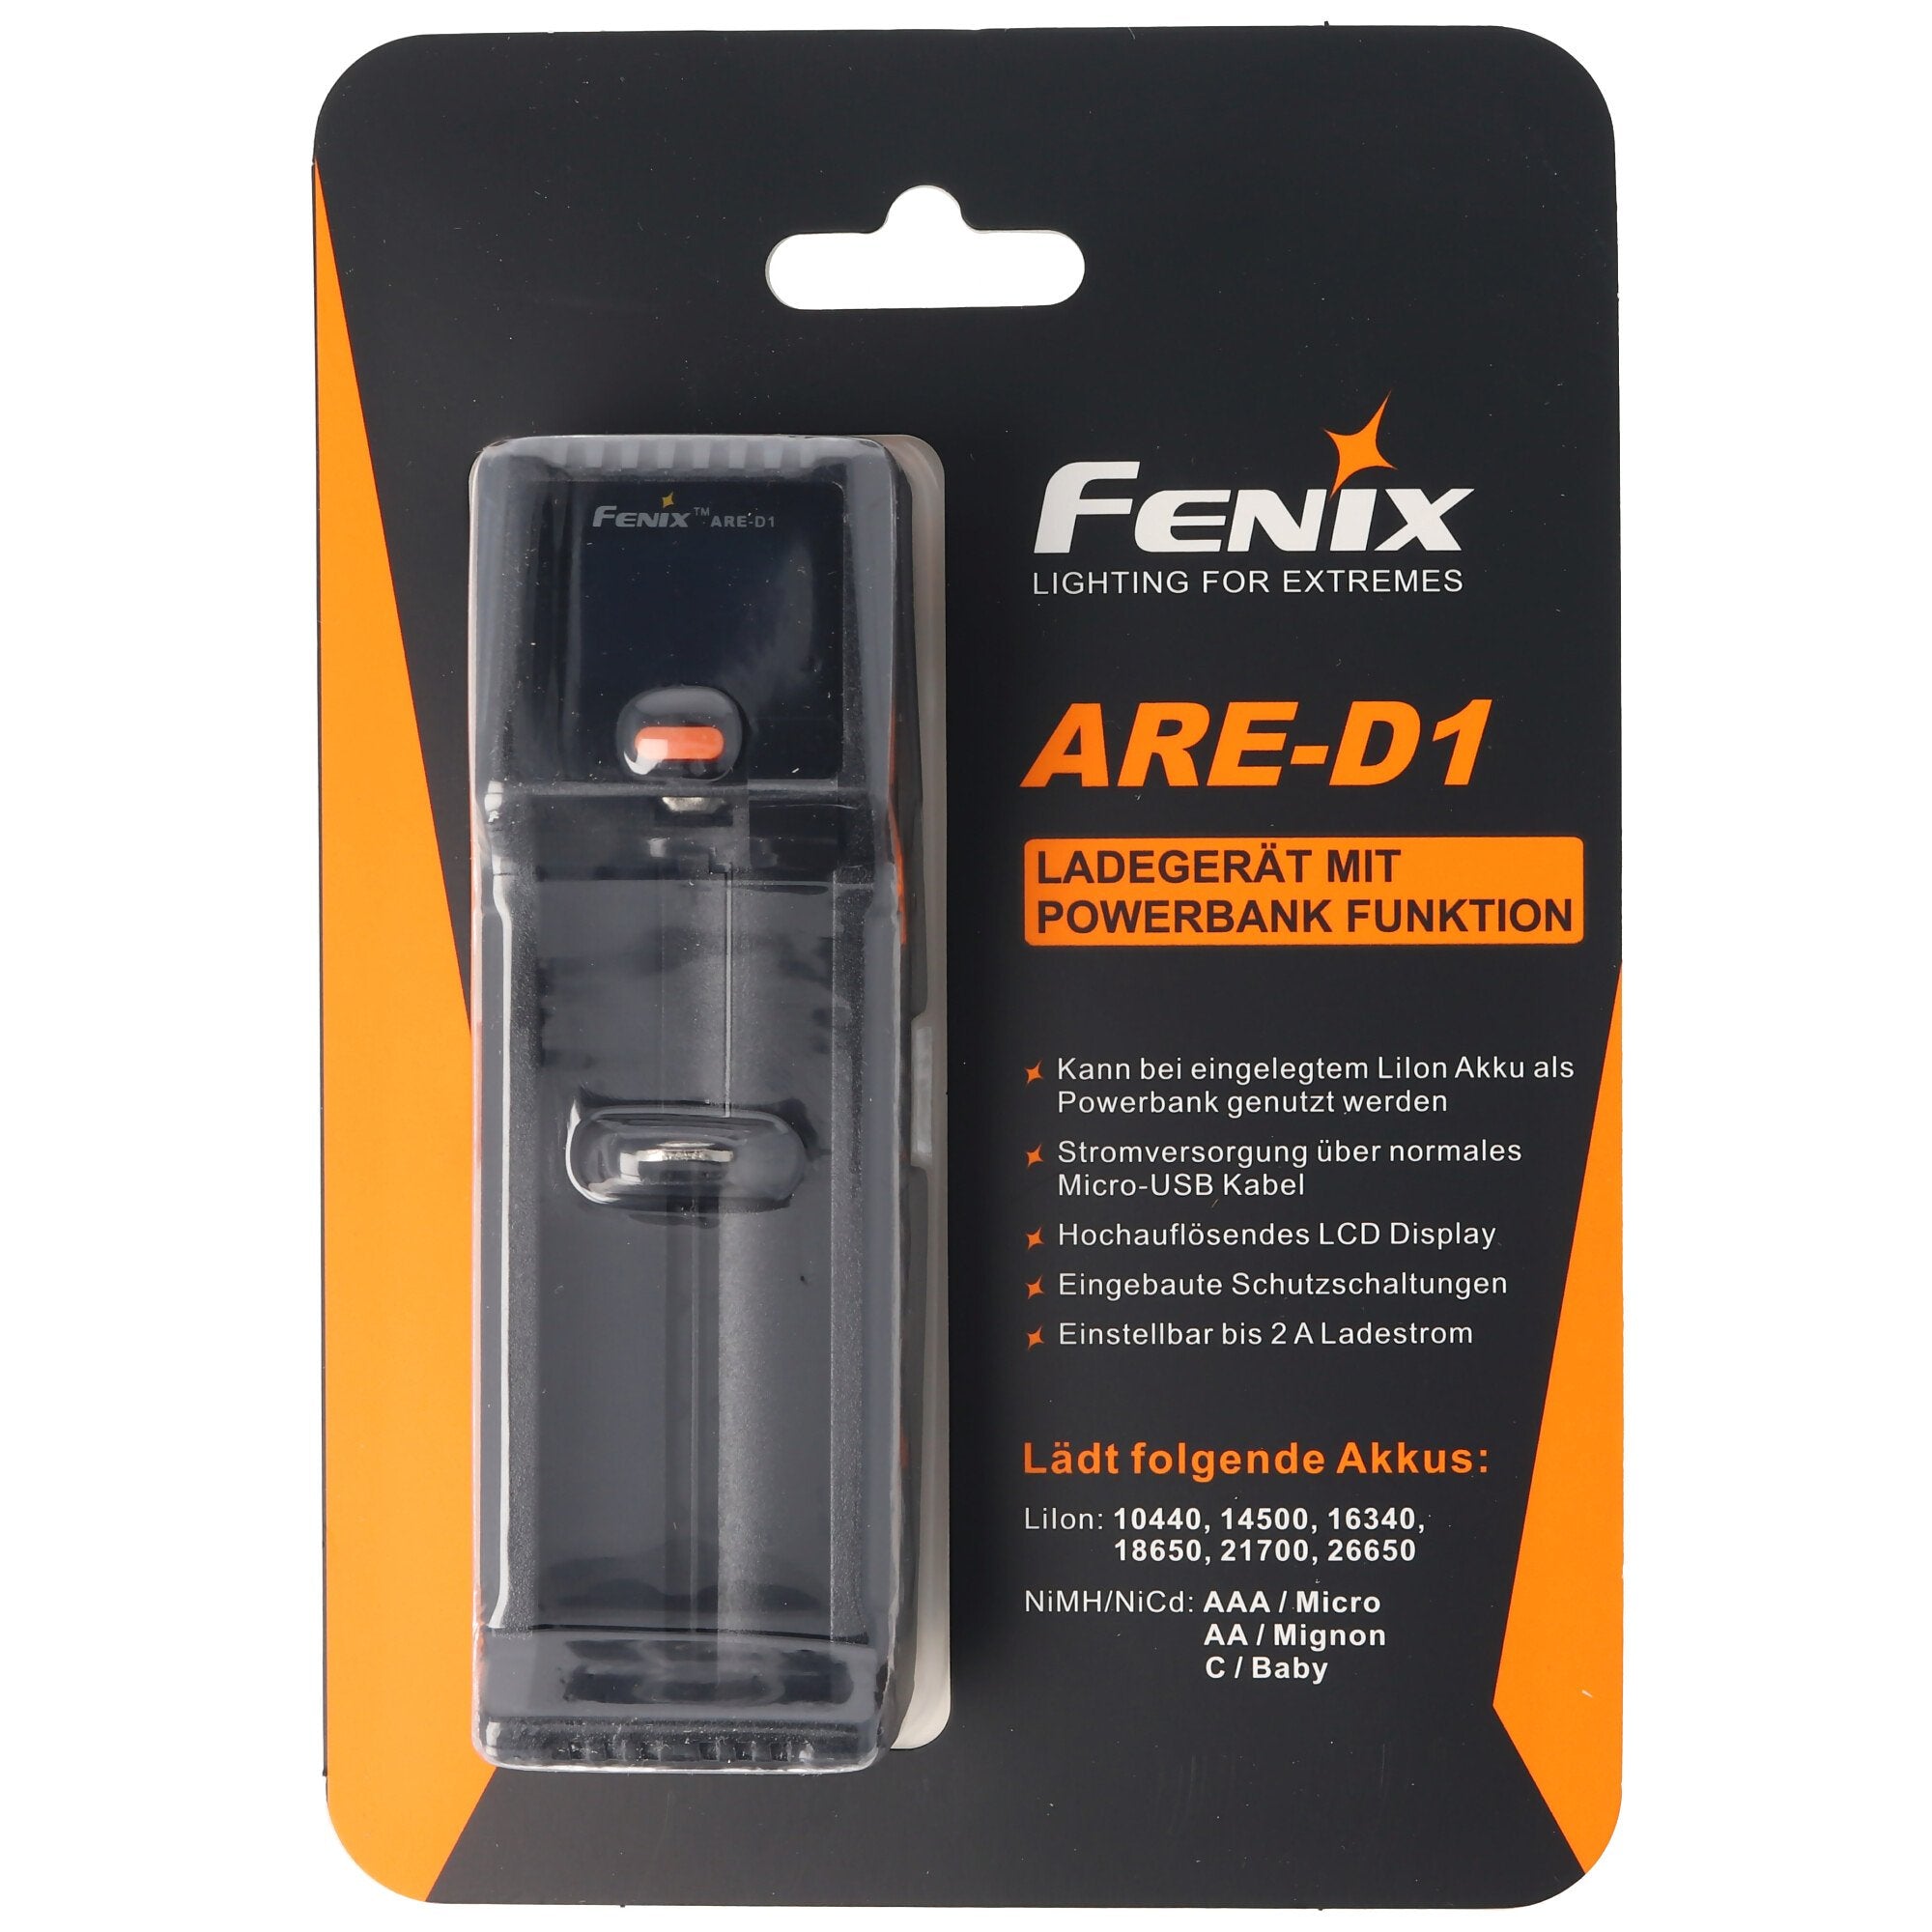 Fenix ARE-D1 single bay charger suitable for 21700, 18650, 26650, 16340, 14500, 10440 Li-Ion, NiMH a